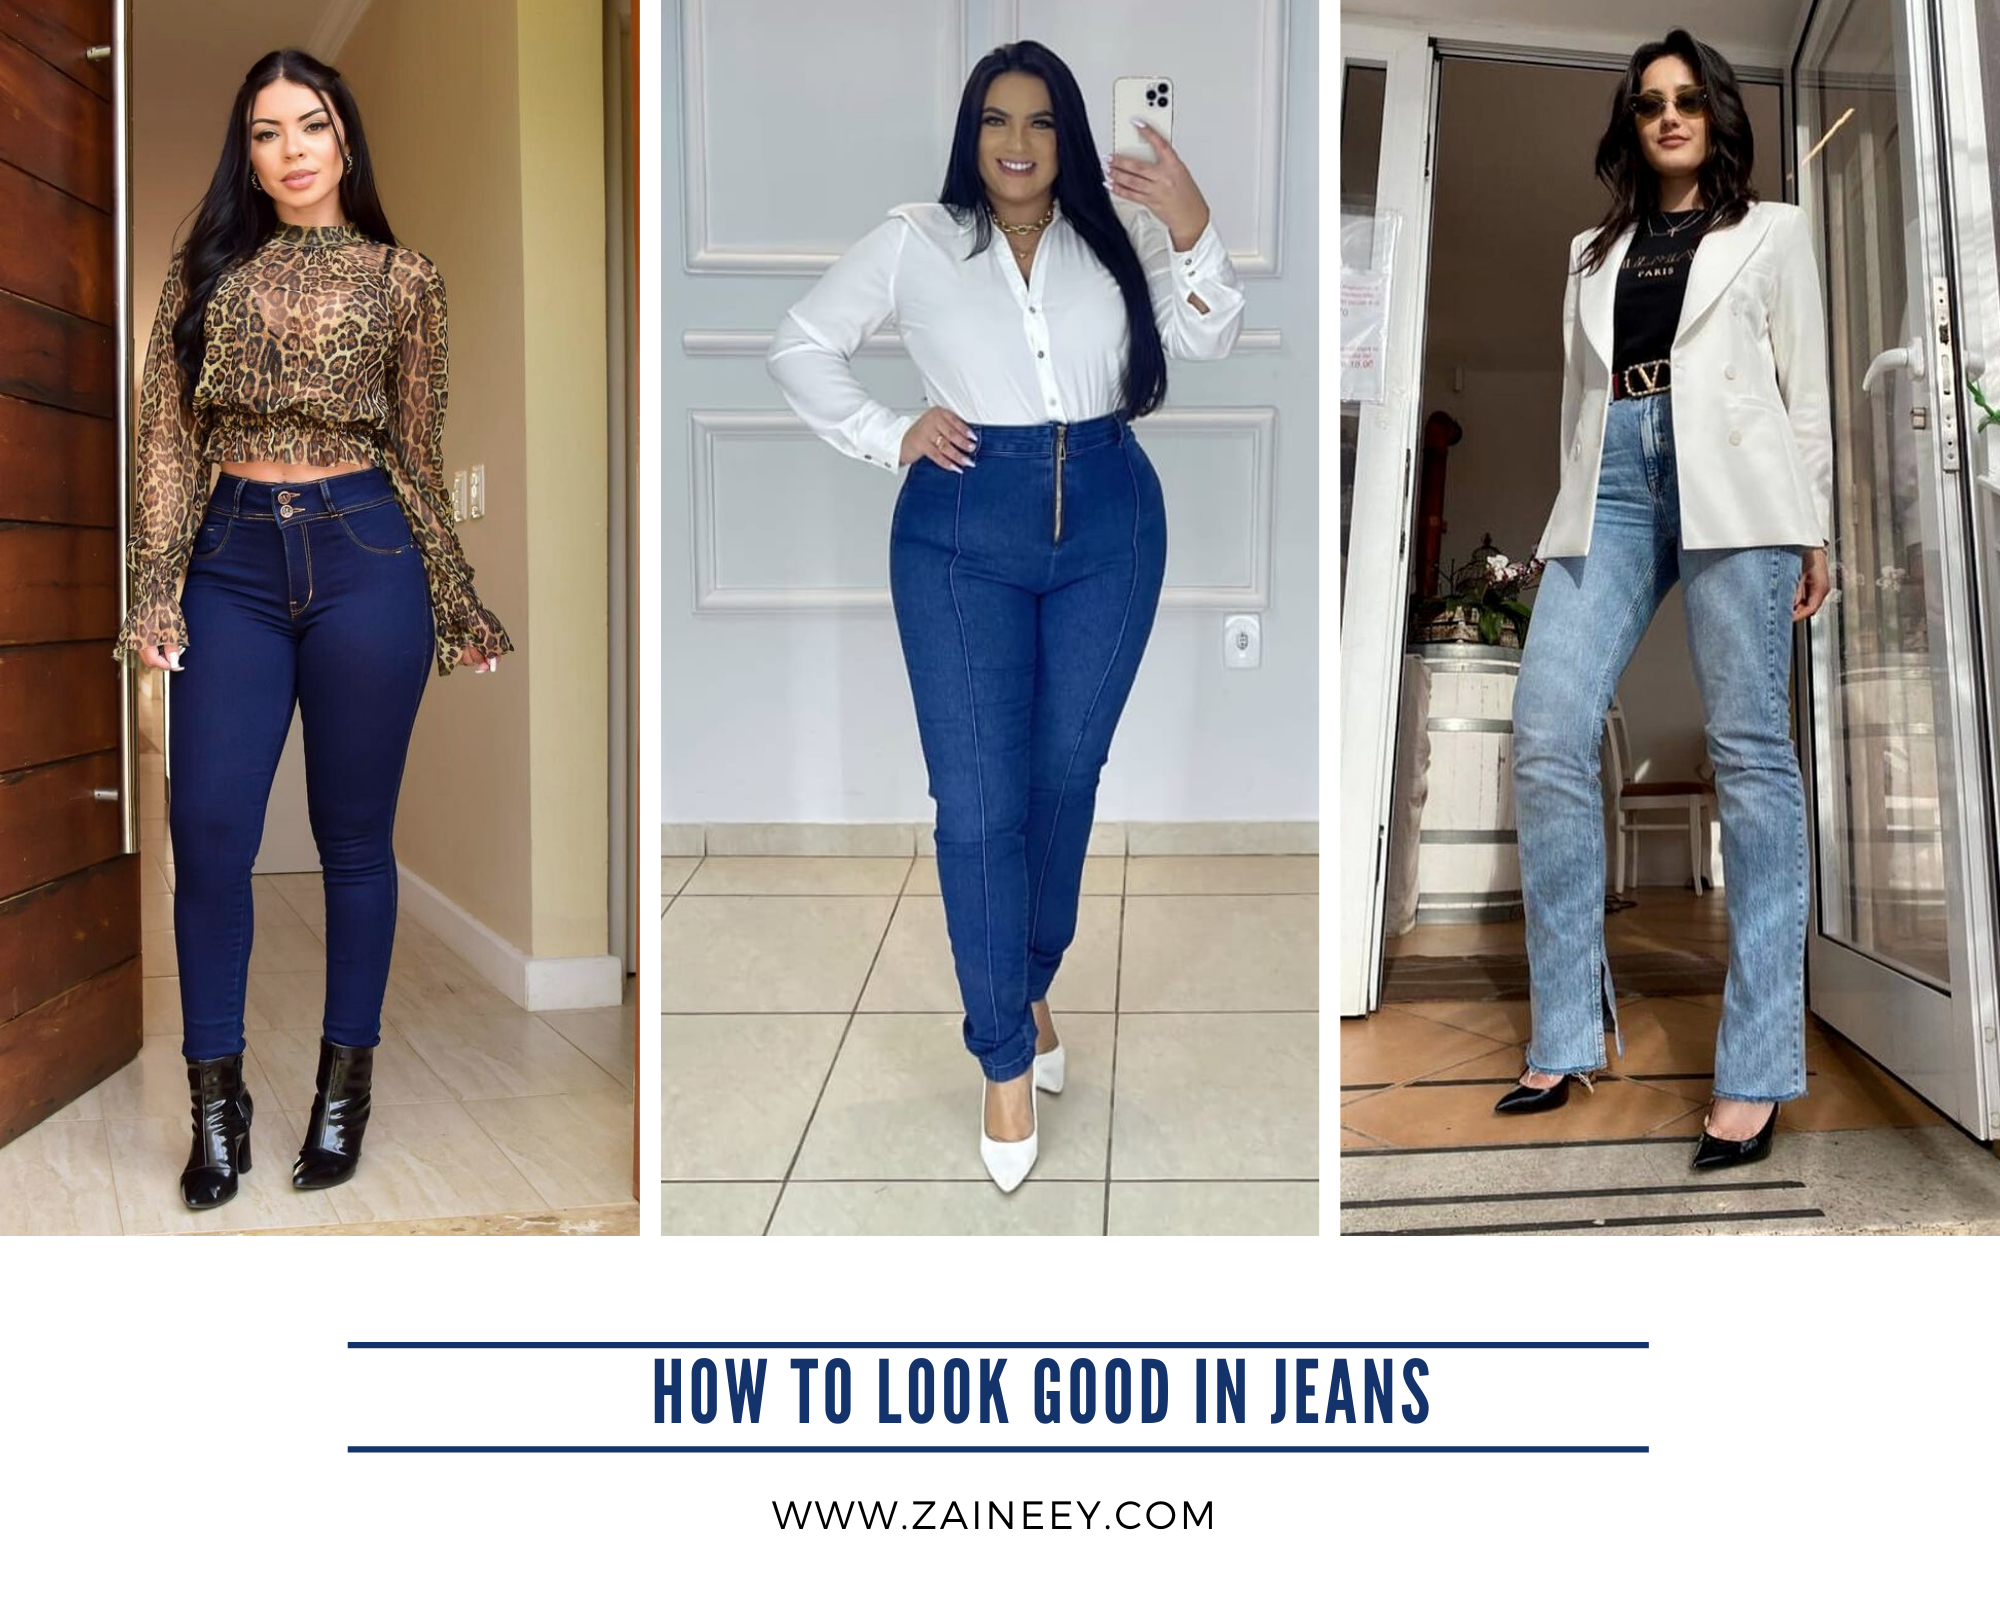 How to look good in jeans as a lady